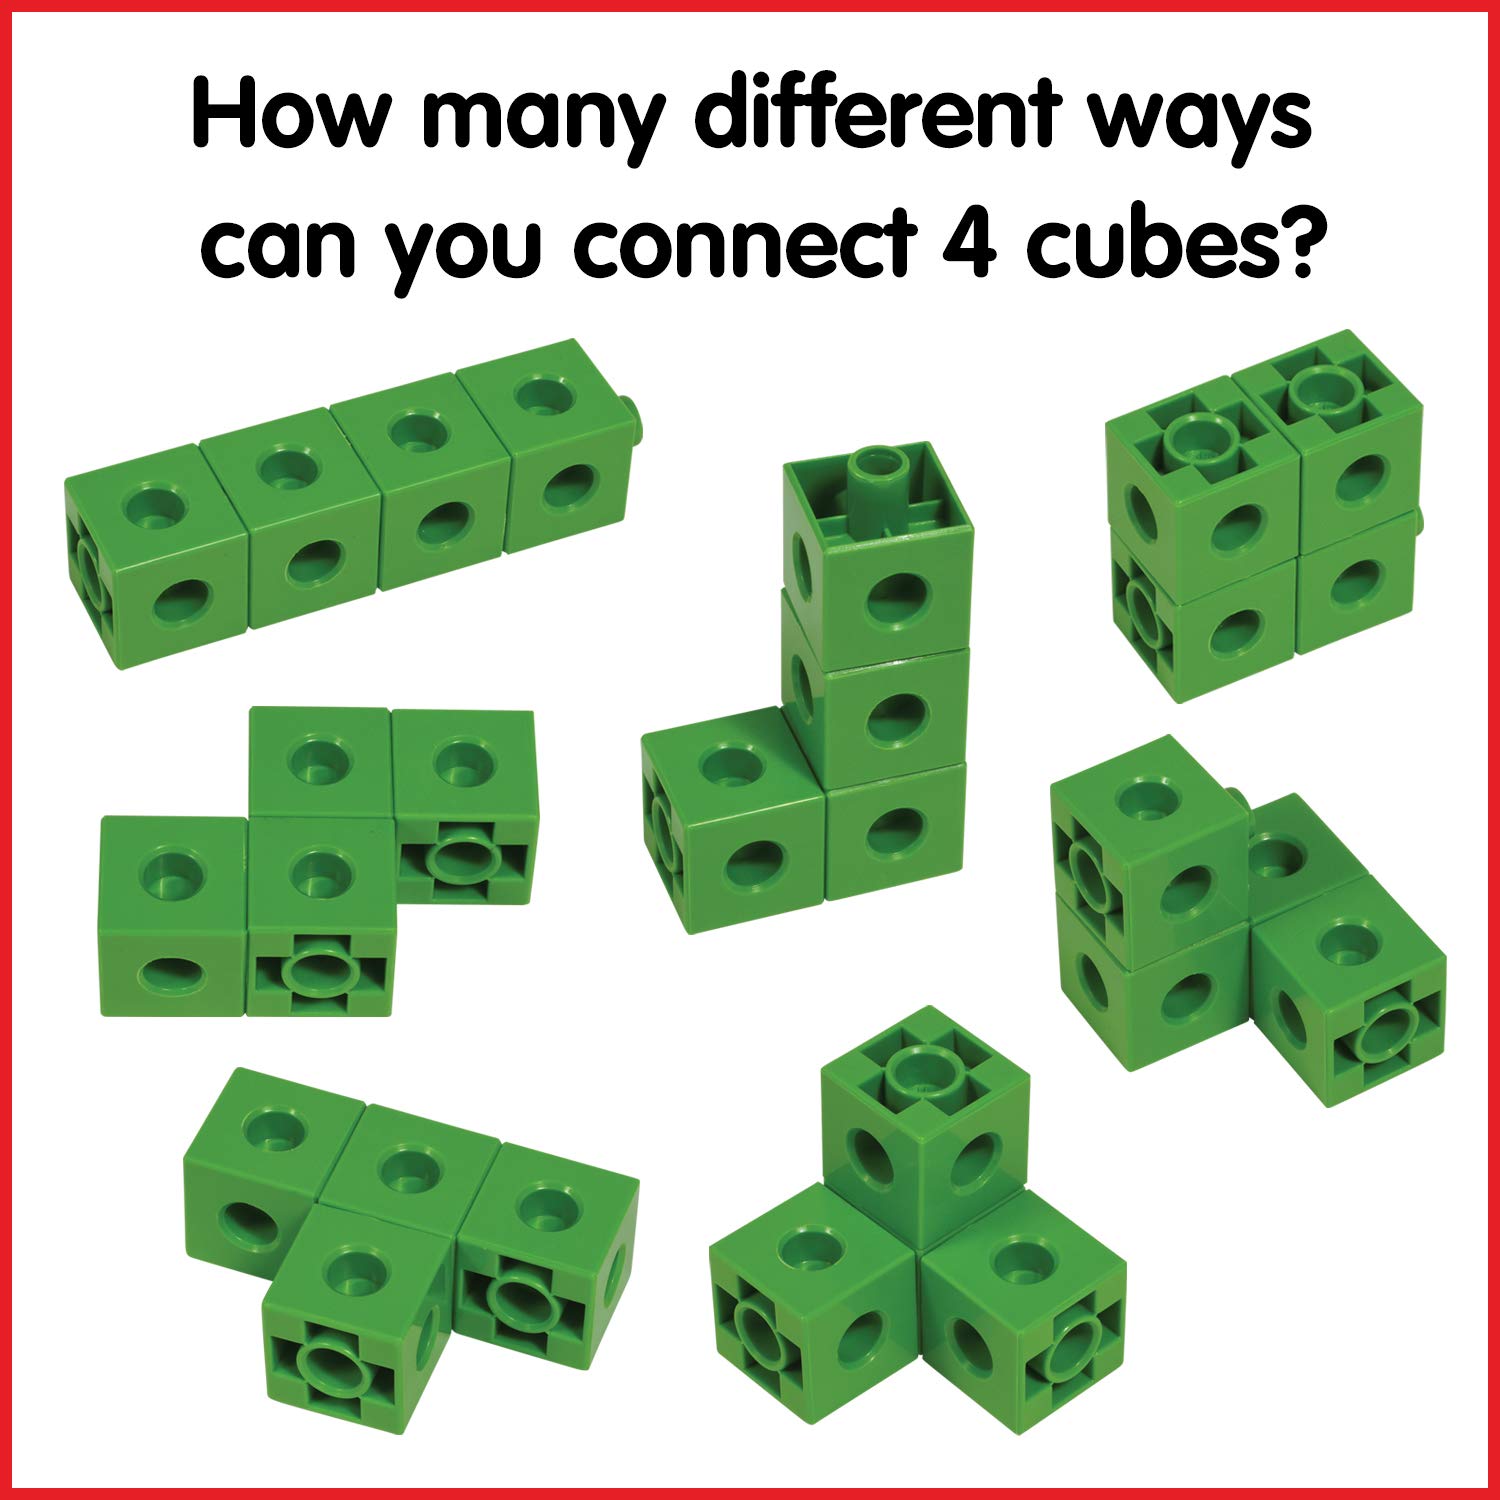 edxeducation Linking Cubes - Set of 100 - Math Manipulatives for Construction and Early Math - For Preschoolers 3+ and Elementary Students